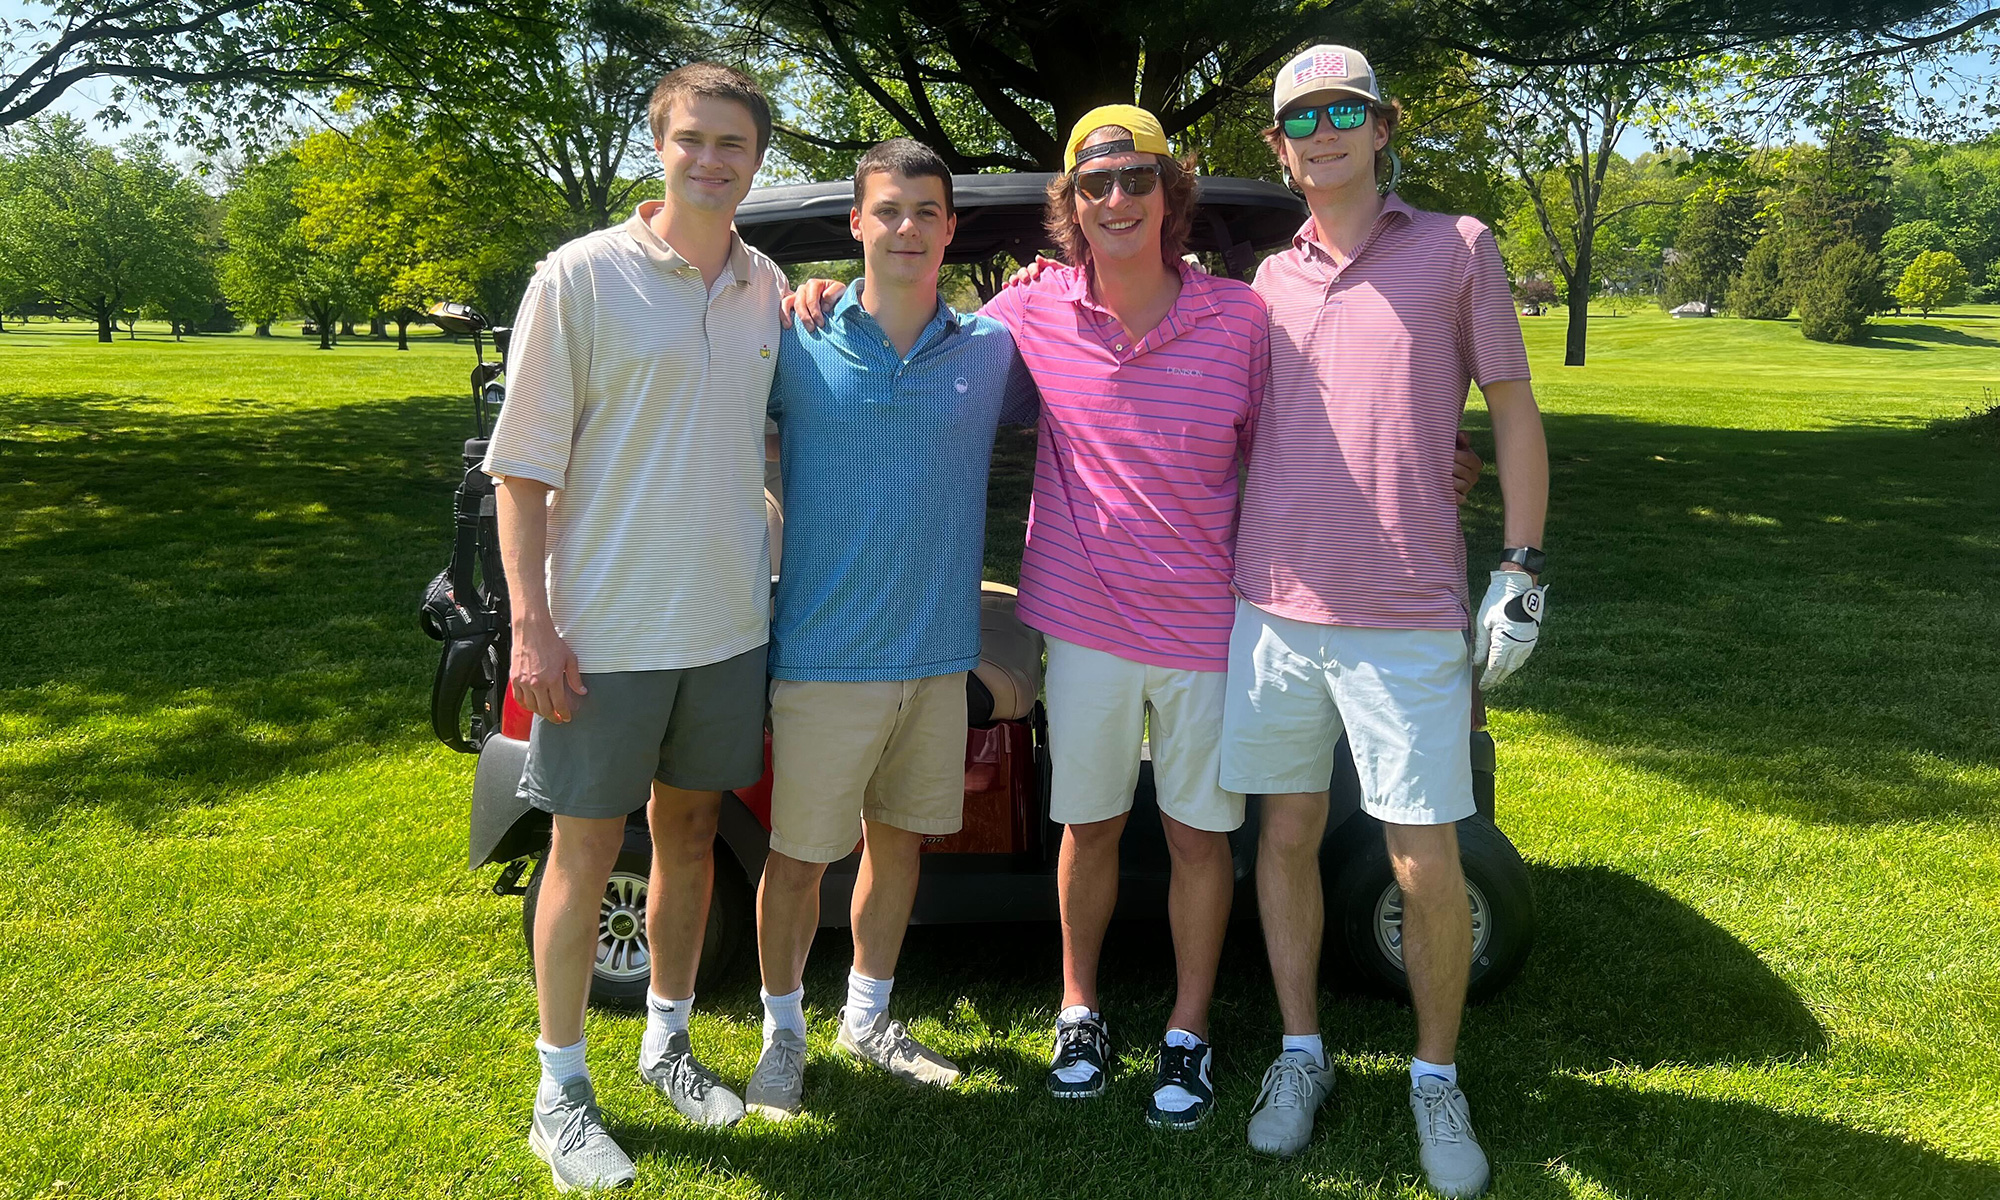 Charlie Gray, Colson Stutz, Nate Swift, and Andrew Fluri at the Denison Golf Course.